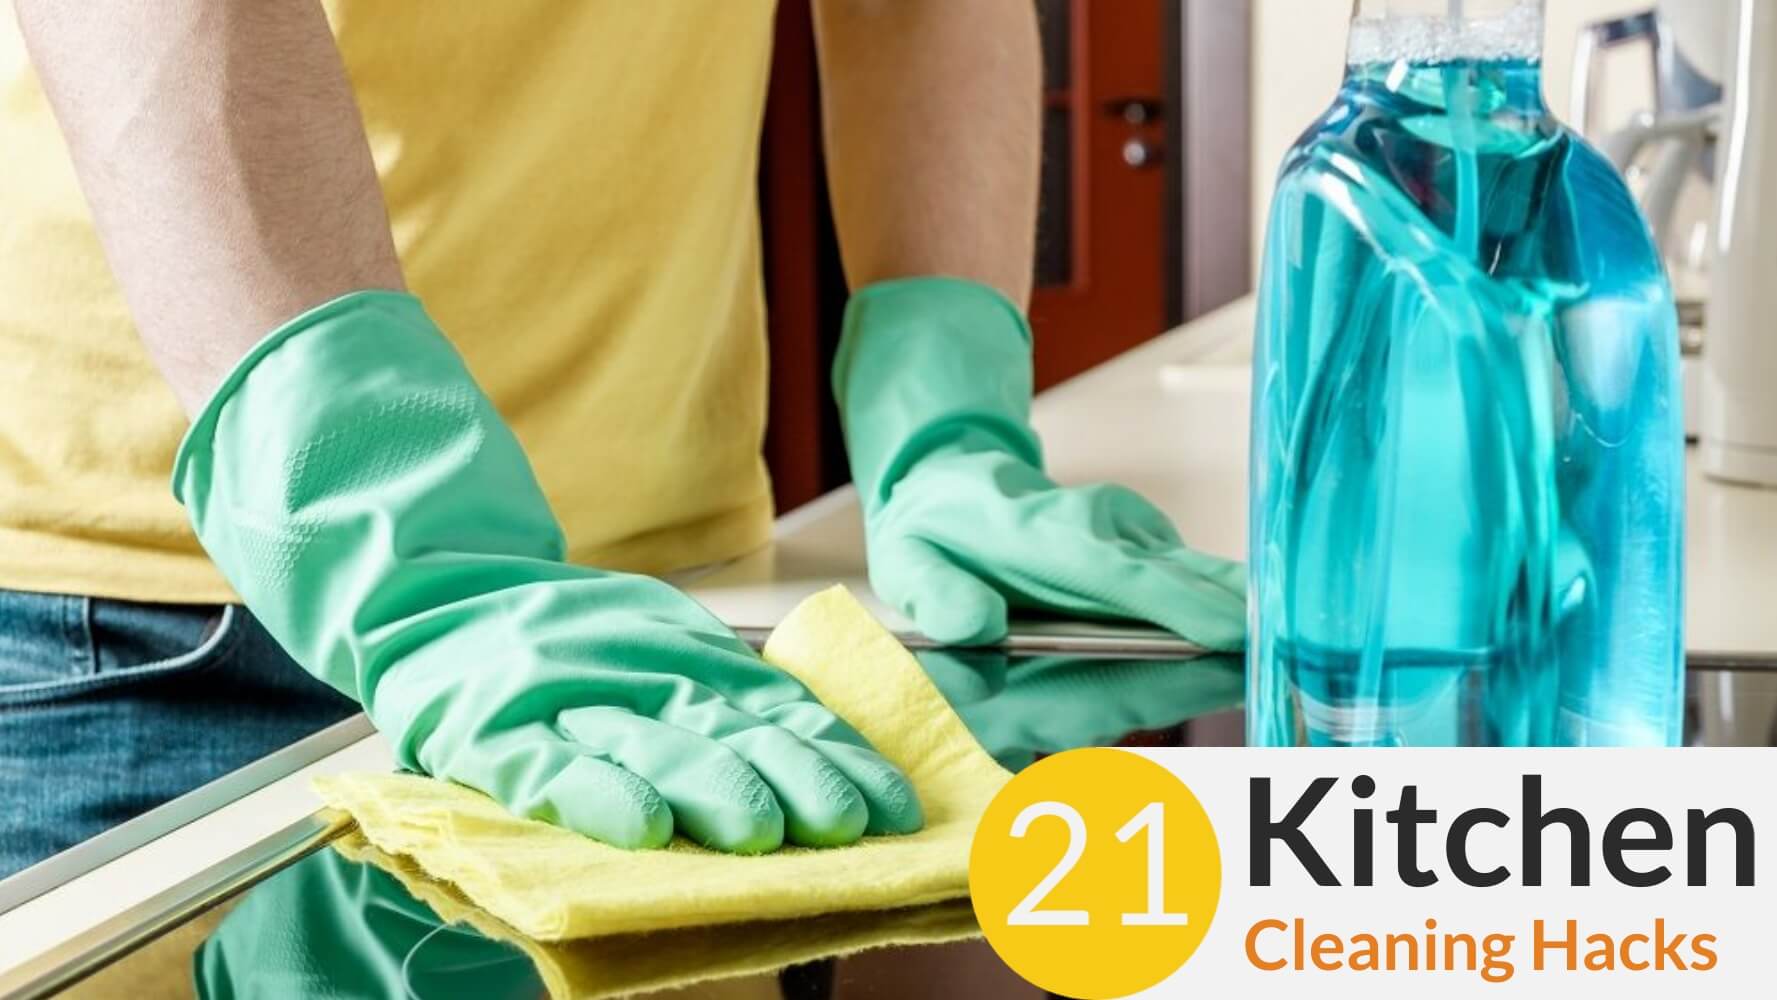 21 kitchen cleaning hacks